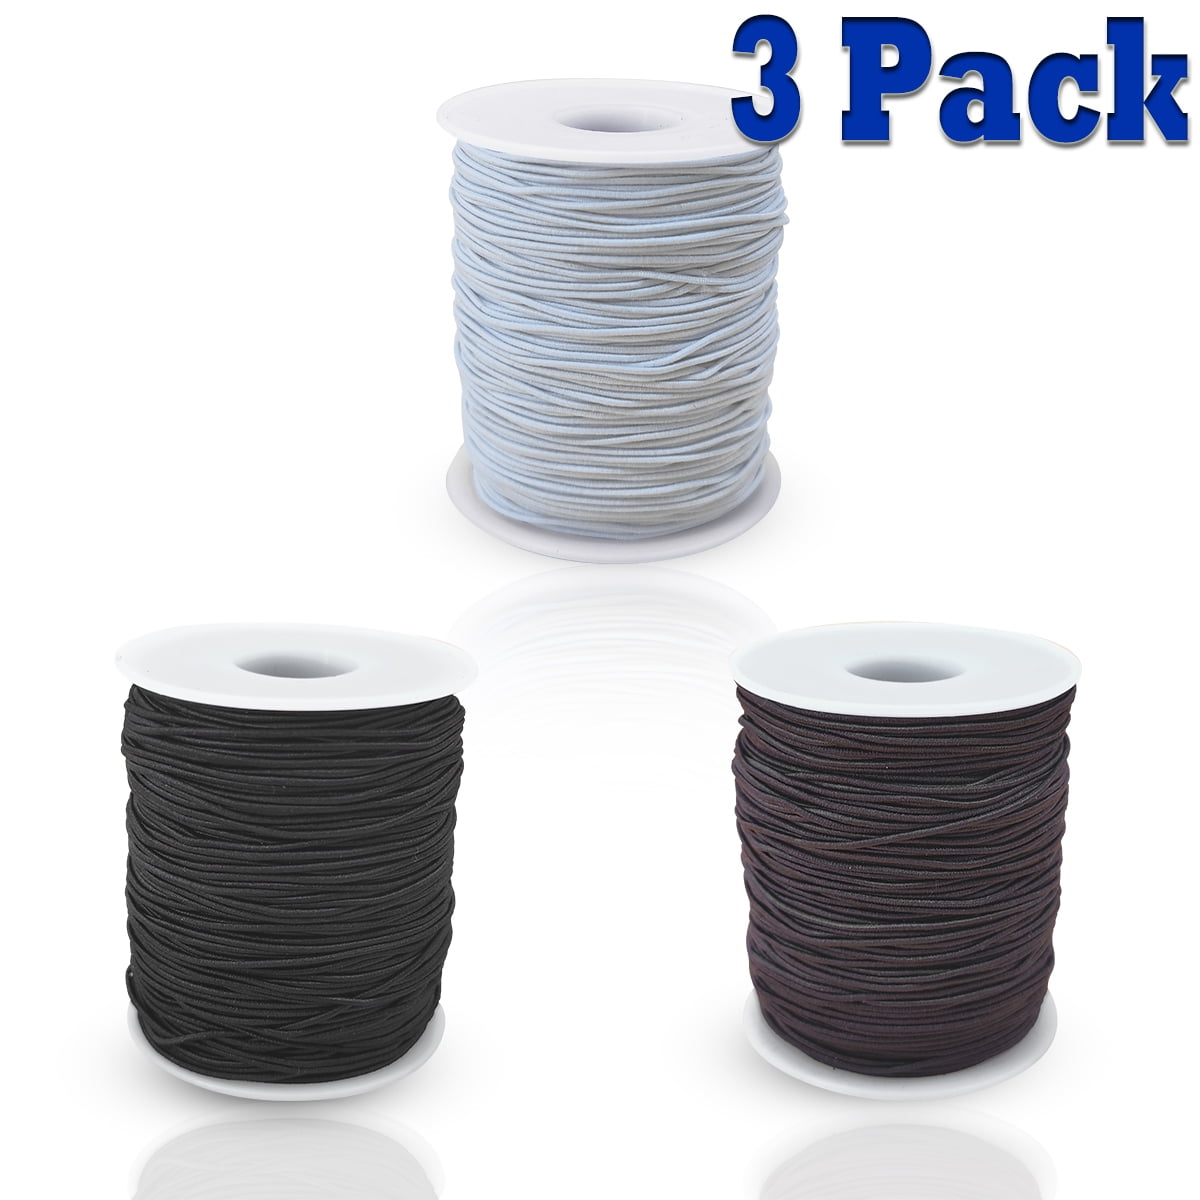 Incraftables Elastic String Cord Set of 3 Rolls (White, Black